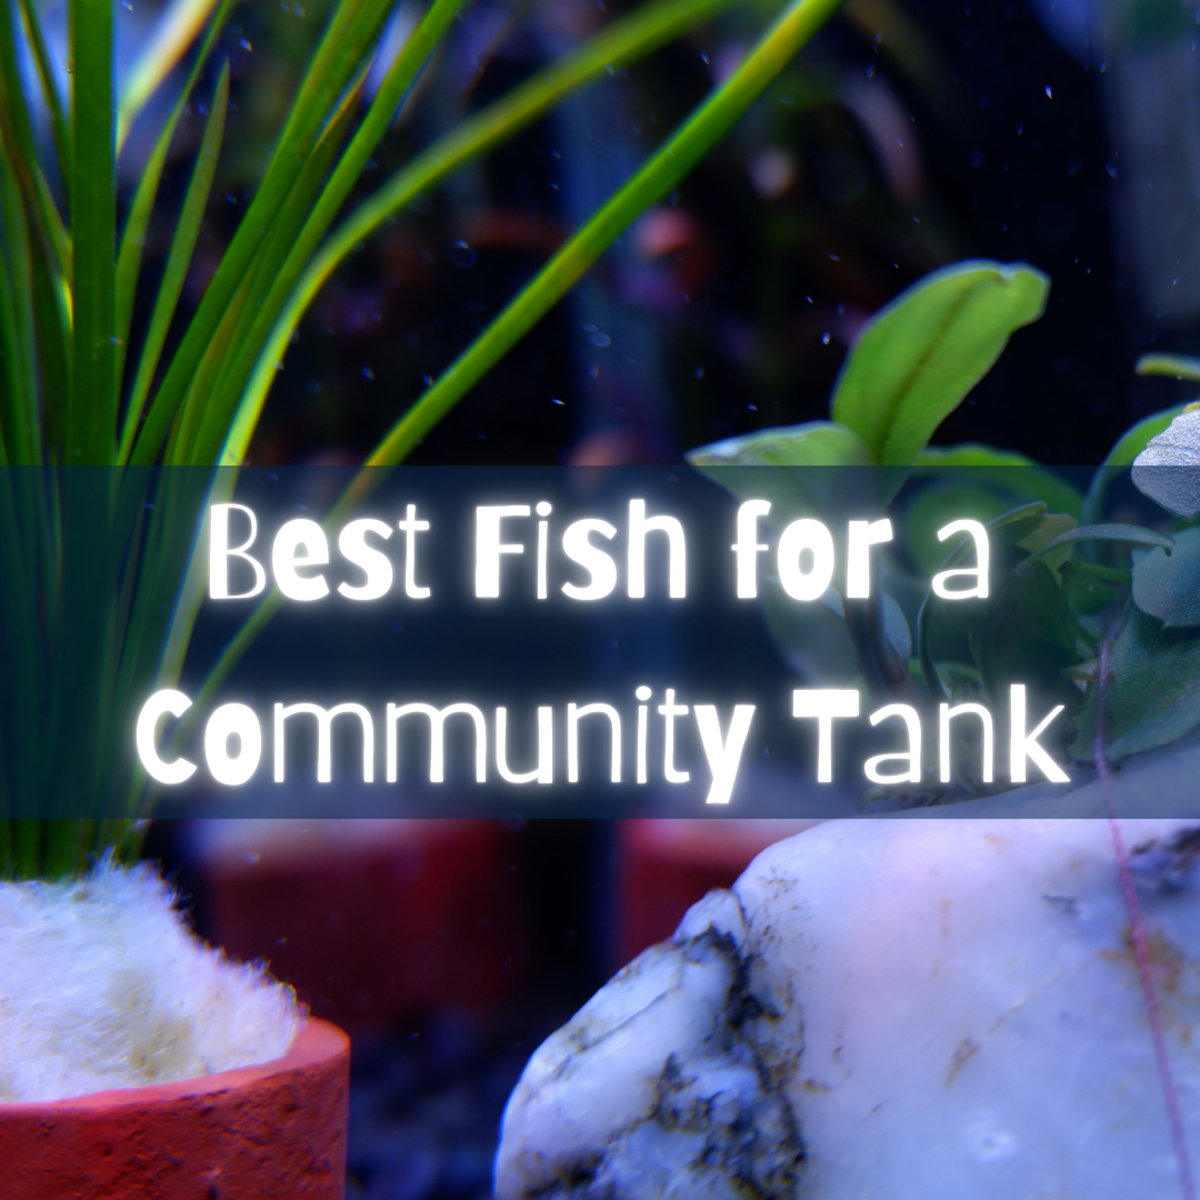 Find out which fish are the best choice for a calm, tranquil freshwater community aquarium.